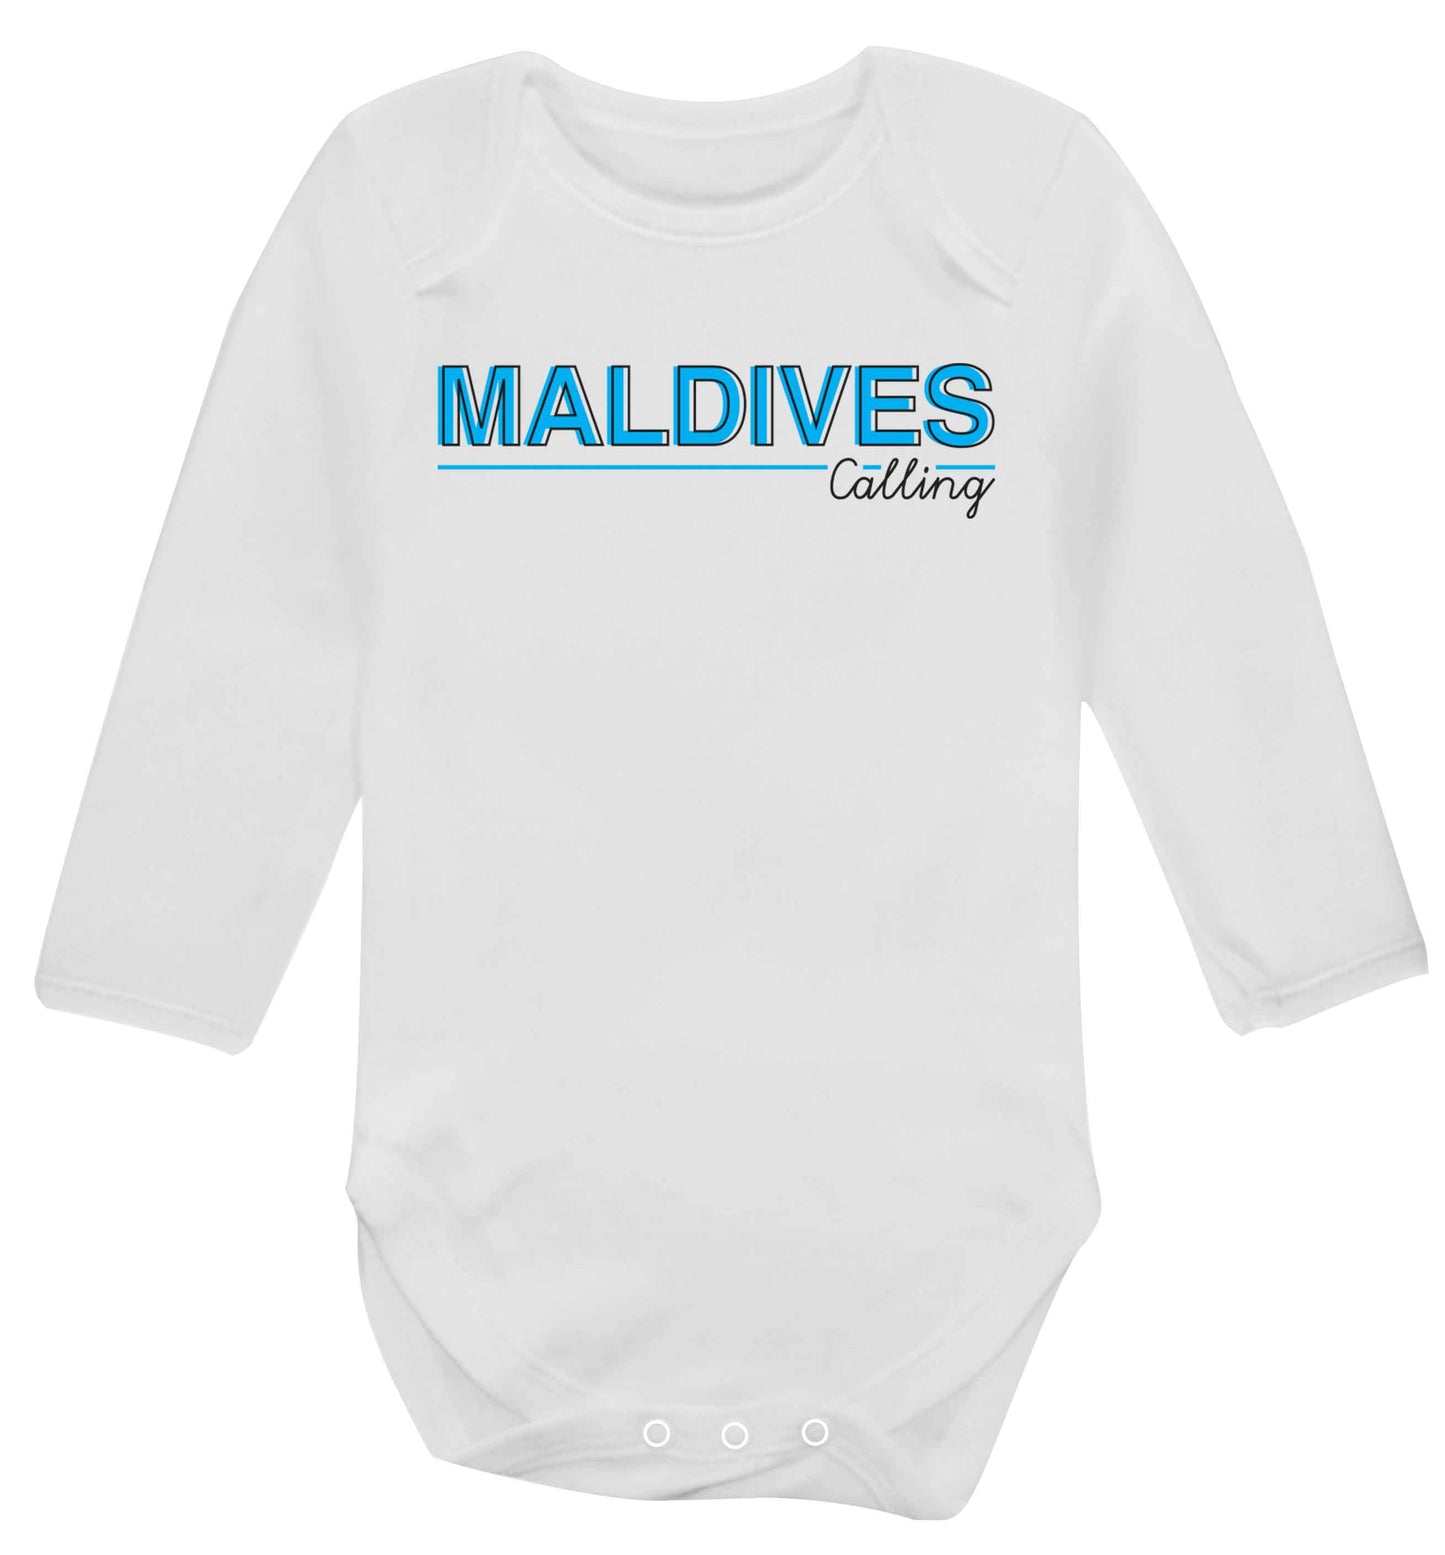 Maldives calling Baby Vest long sleeved white 6-12 months